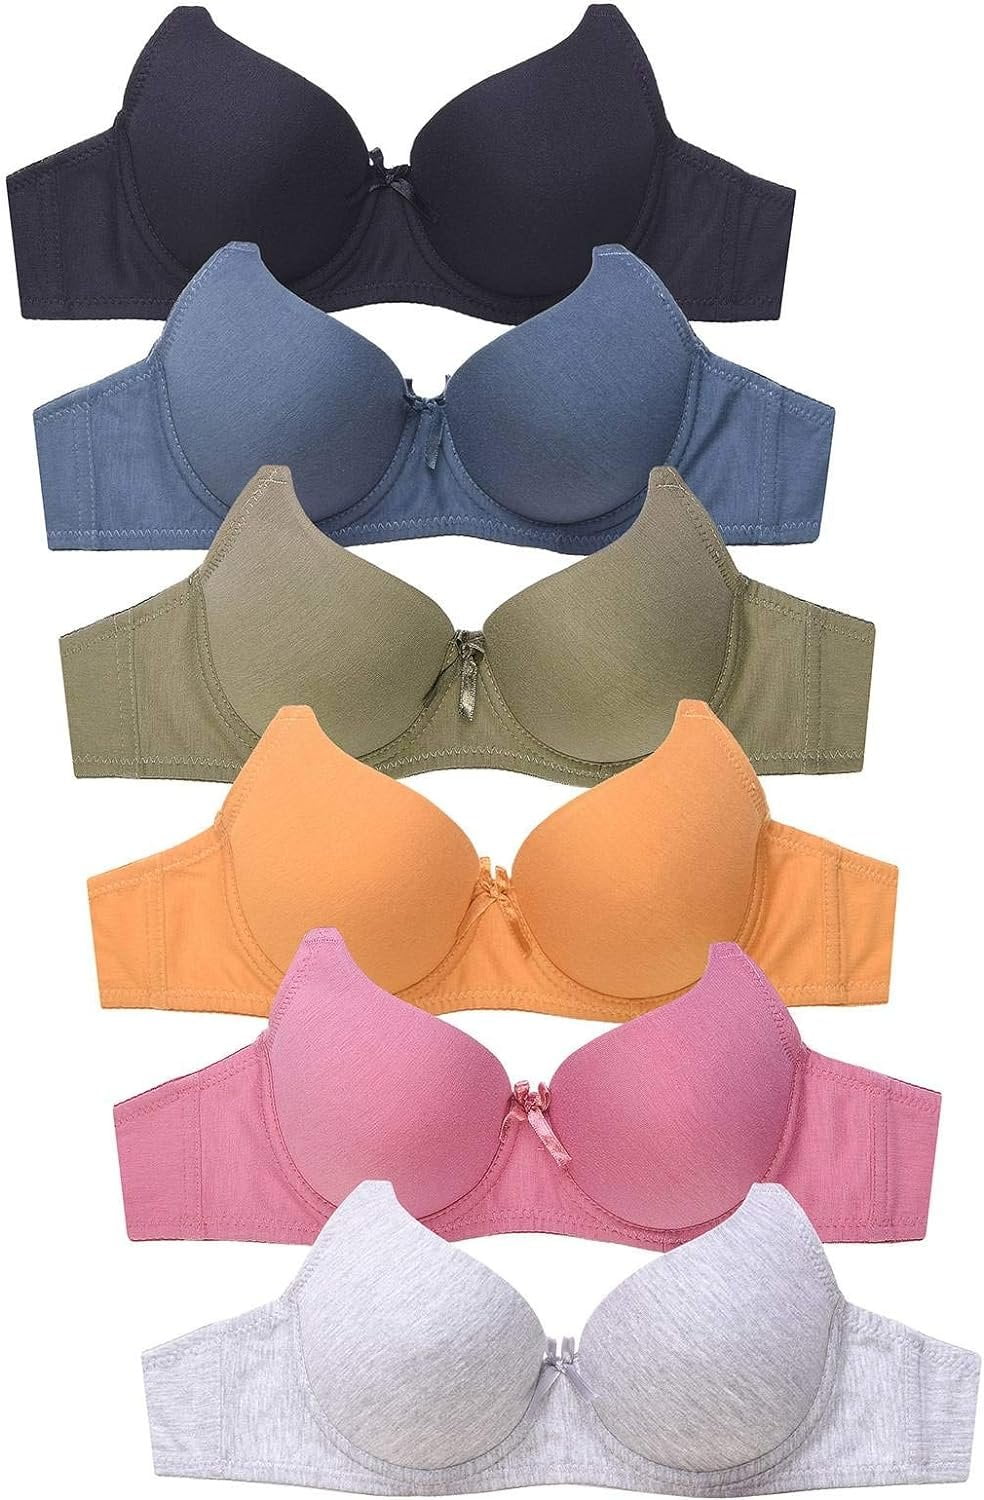 247 Frenzy Women's Essentials Sofra or Mamia PACK OF 6 Demi Cup